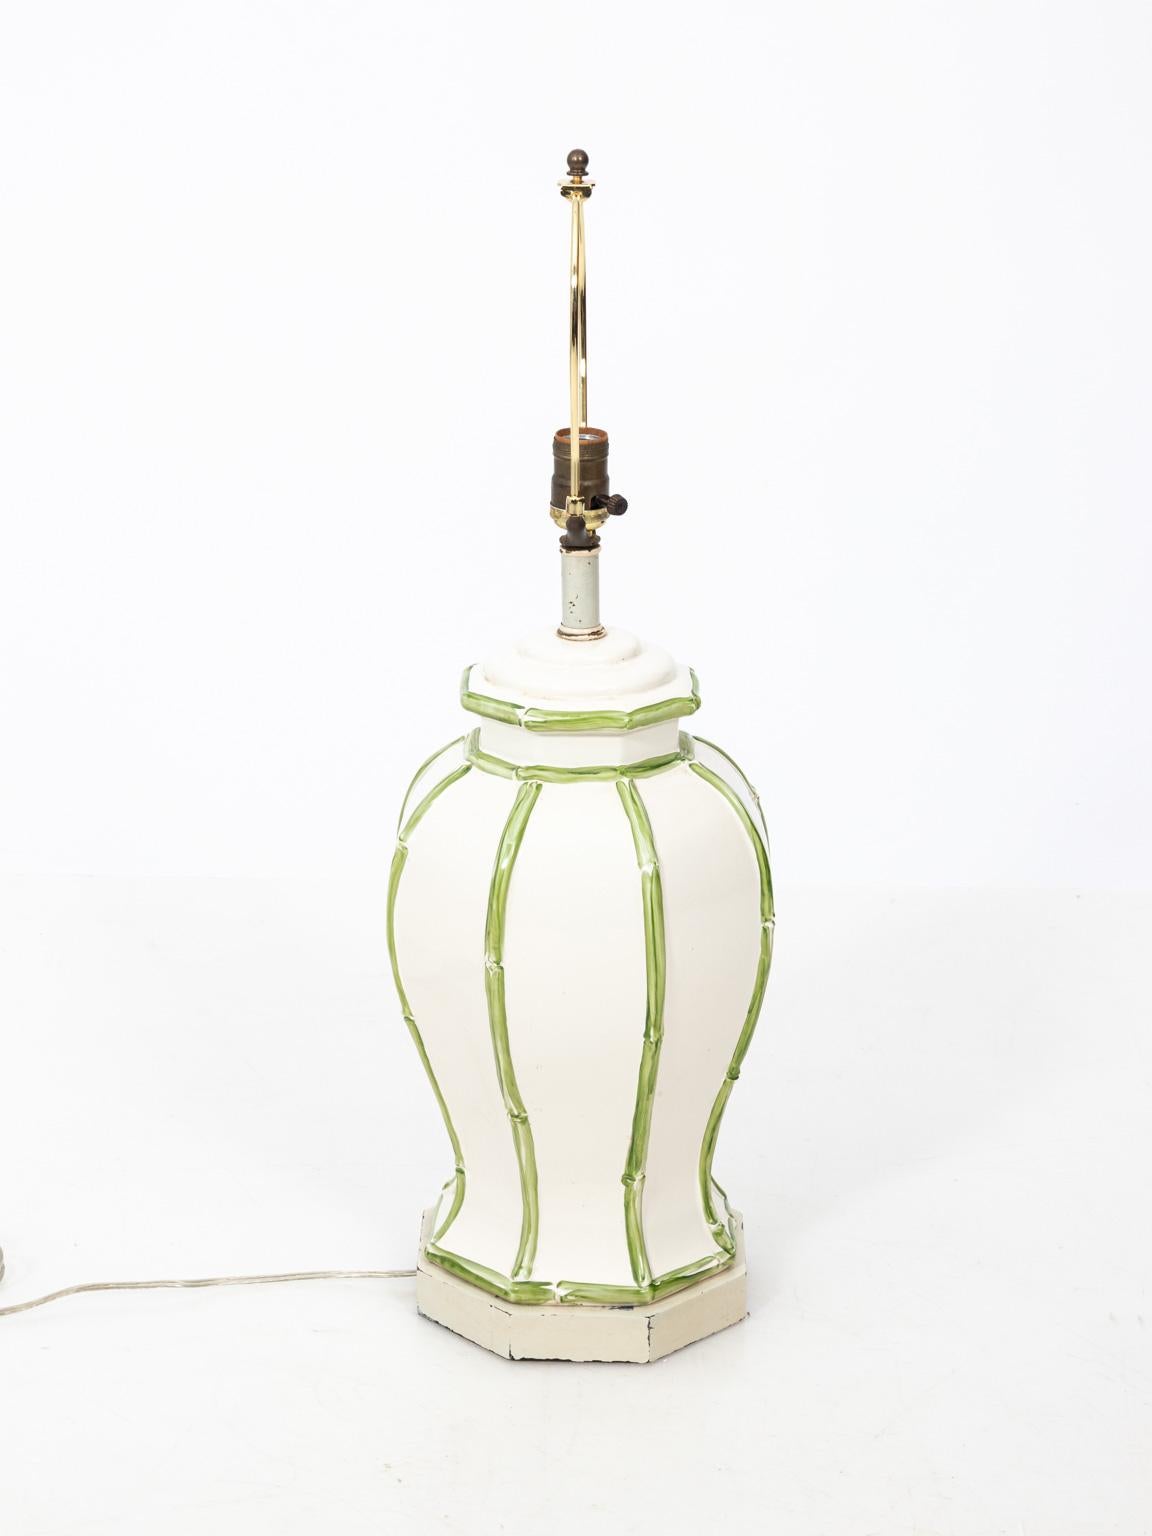 Hollywood Regency style, faux bamboo ceramic table lamp with green painted faux-bamboo trim circa 1970s. Please note of wear consistent with age including paint loss on the base. Made in the United States. Shade not included.